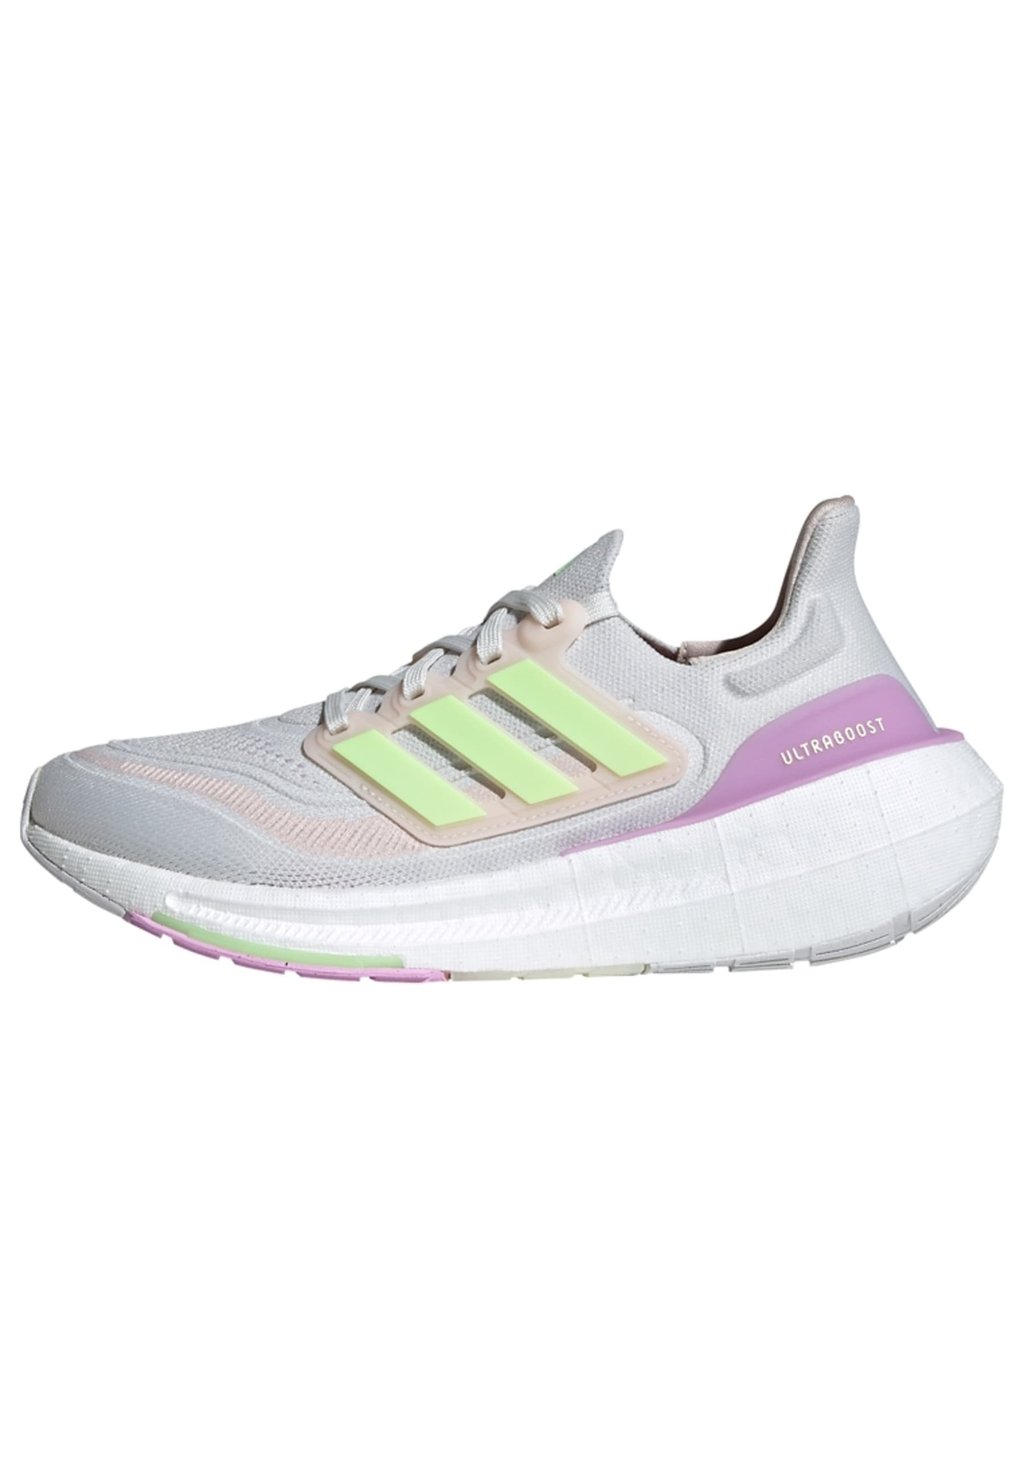 кроссовки adidas originals zx 1000 linen green halo green crystal white Кроссовки Natural Running ULTRABOOST adidas Performance, цвет crystal white green spark bliss lilac